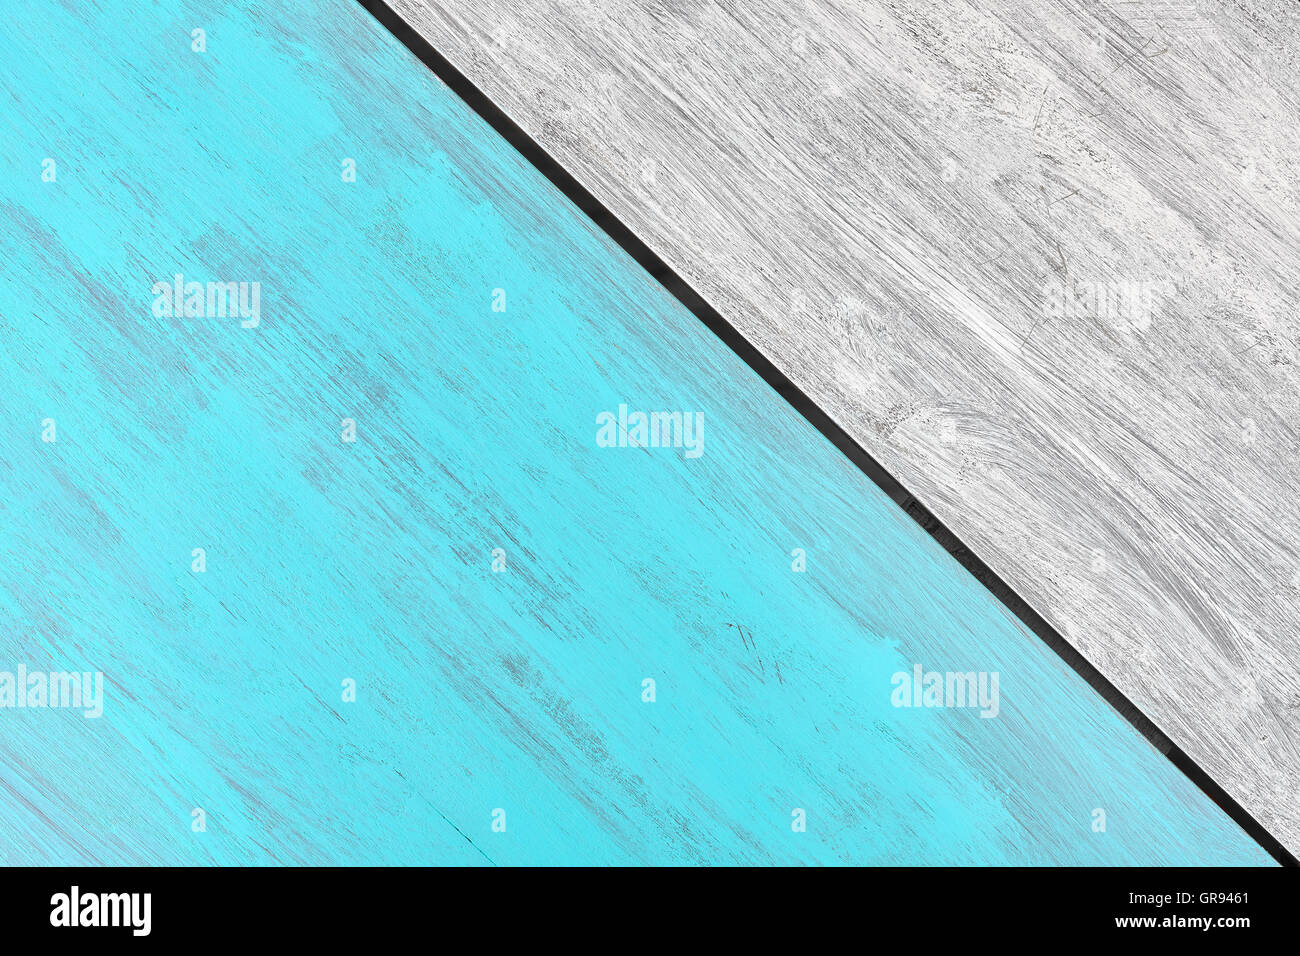 Rustic blue and white painted wooden table, view from above, copy space. Stock Photo